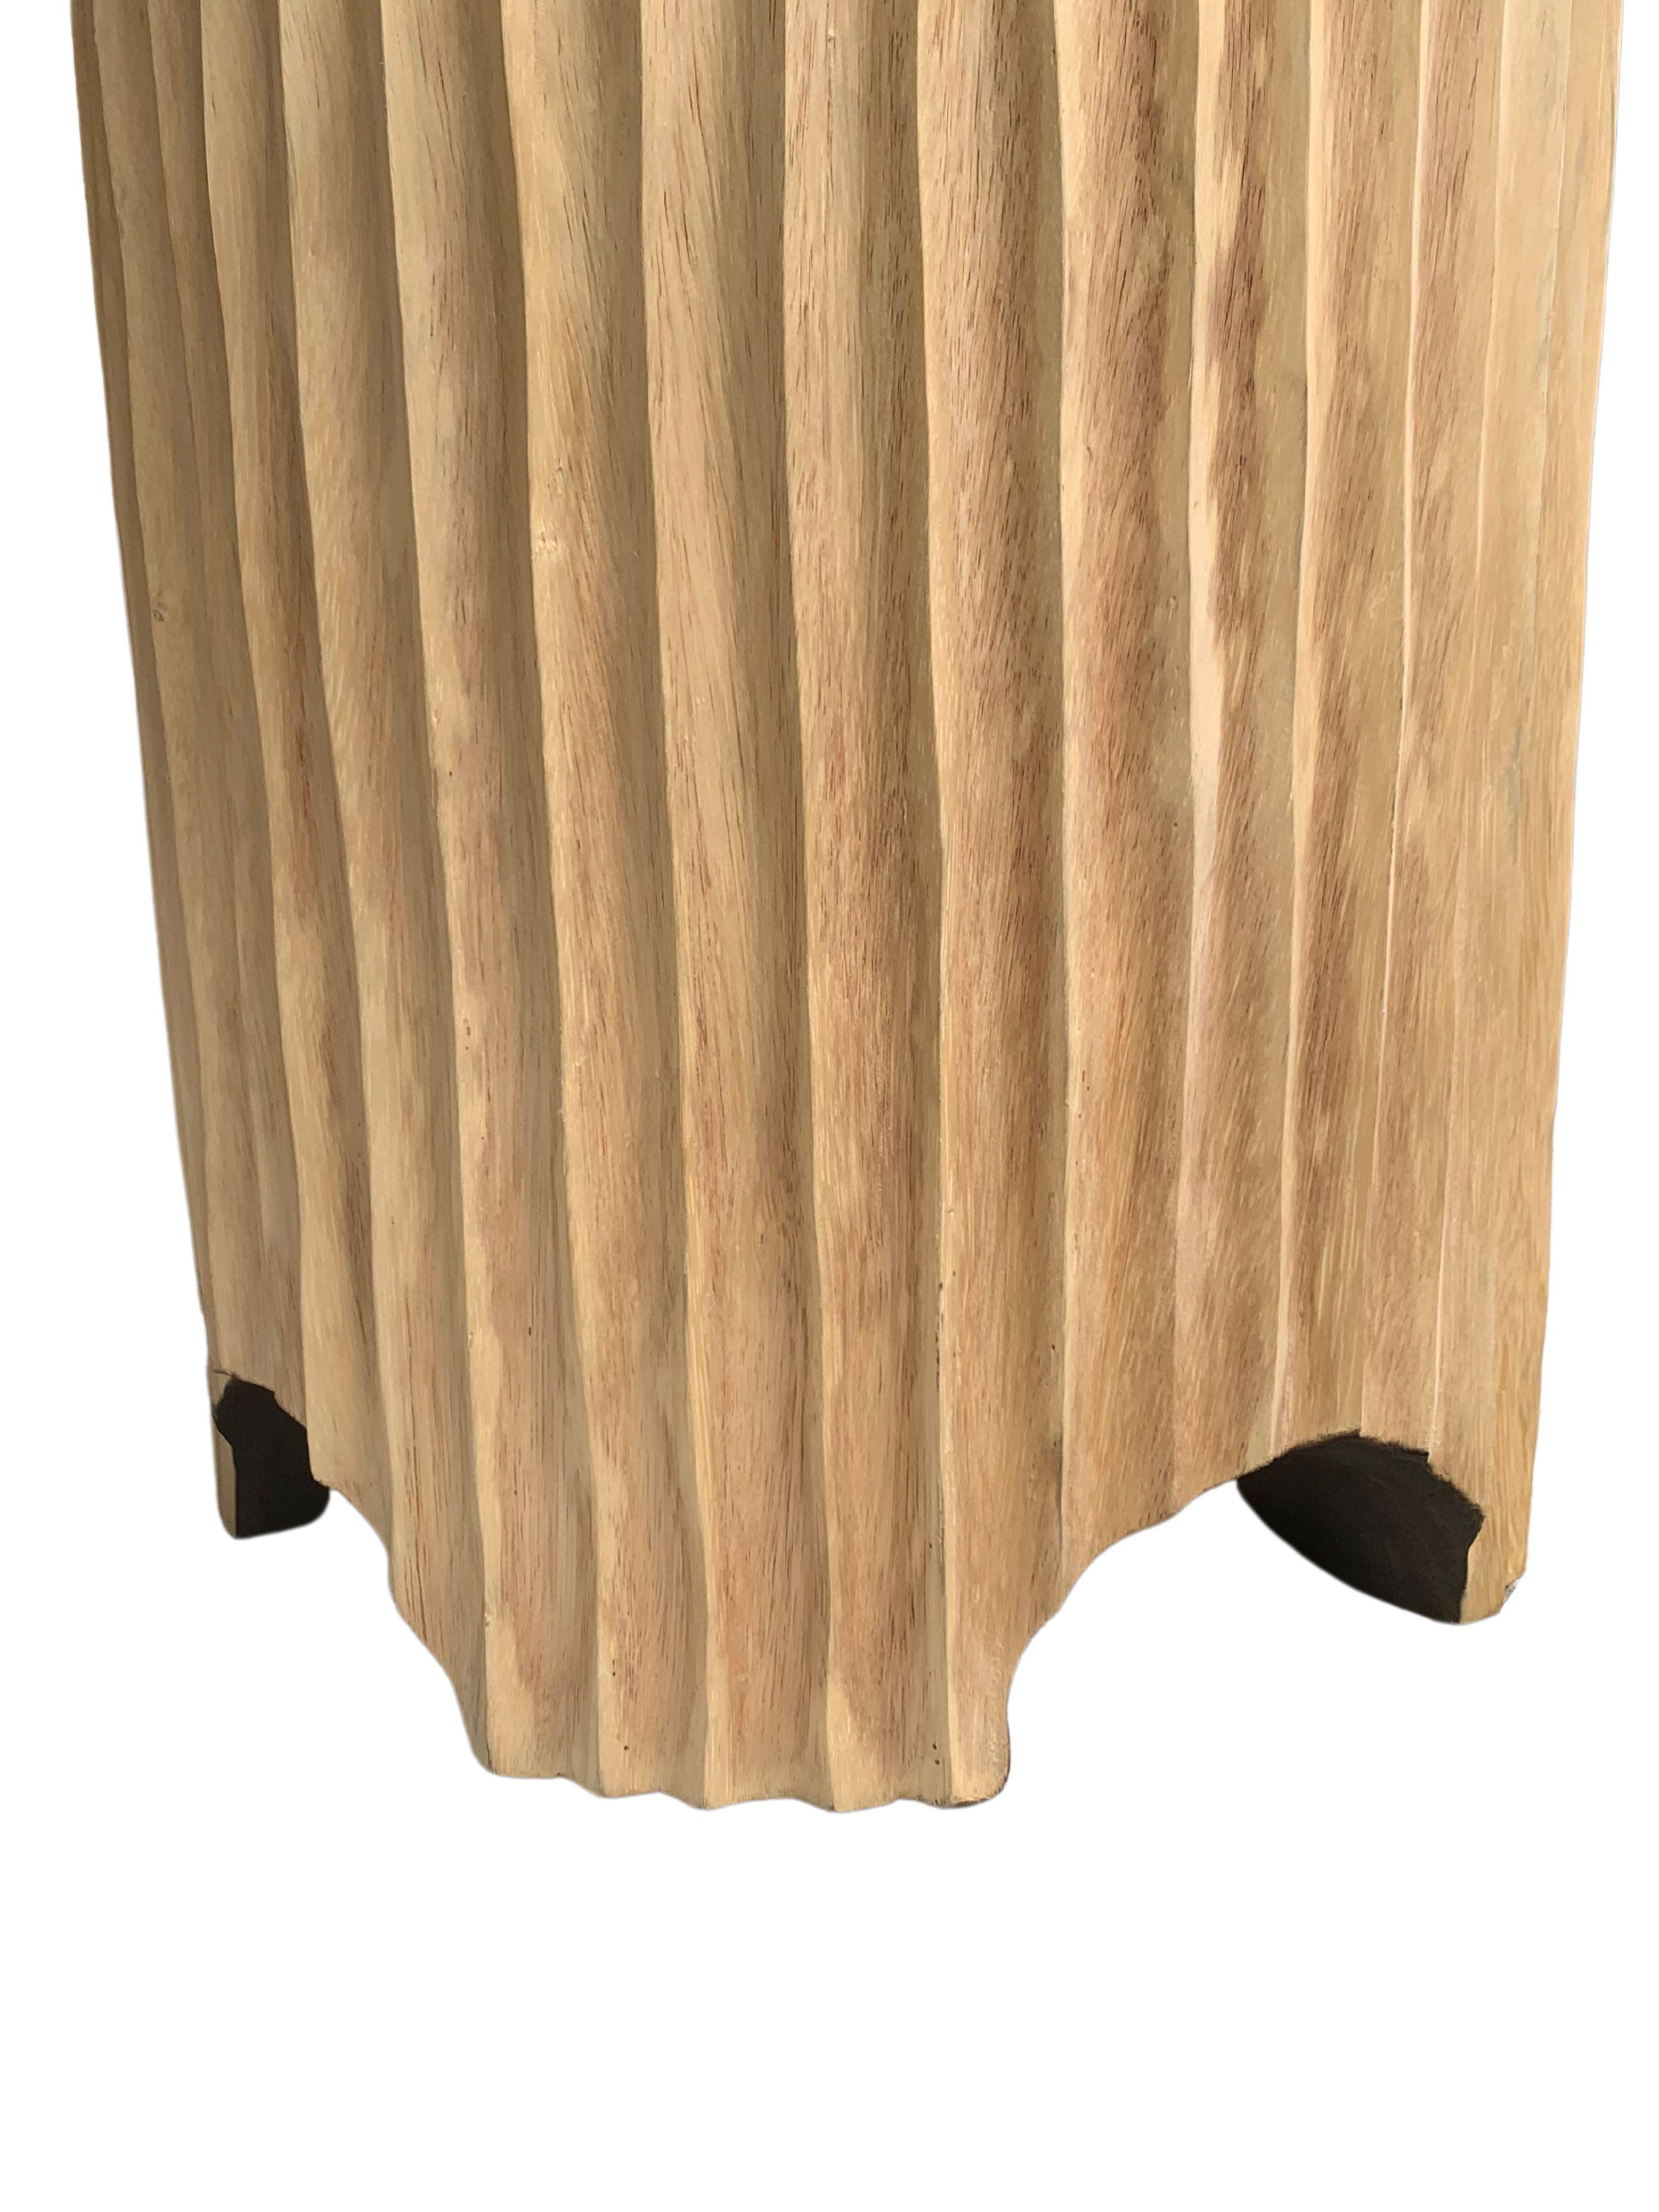 Indonesian Sculptural Side Table Mango Wood Modern Organic For Sale